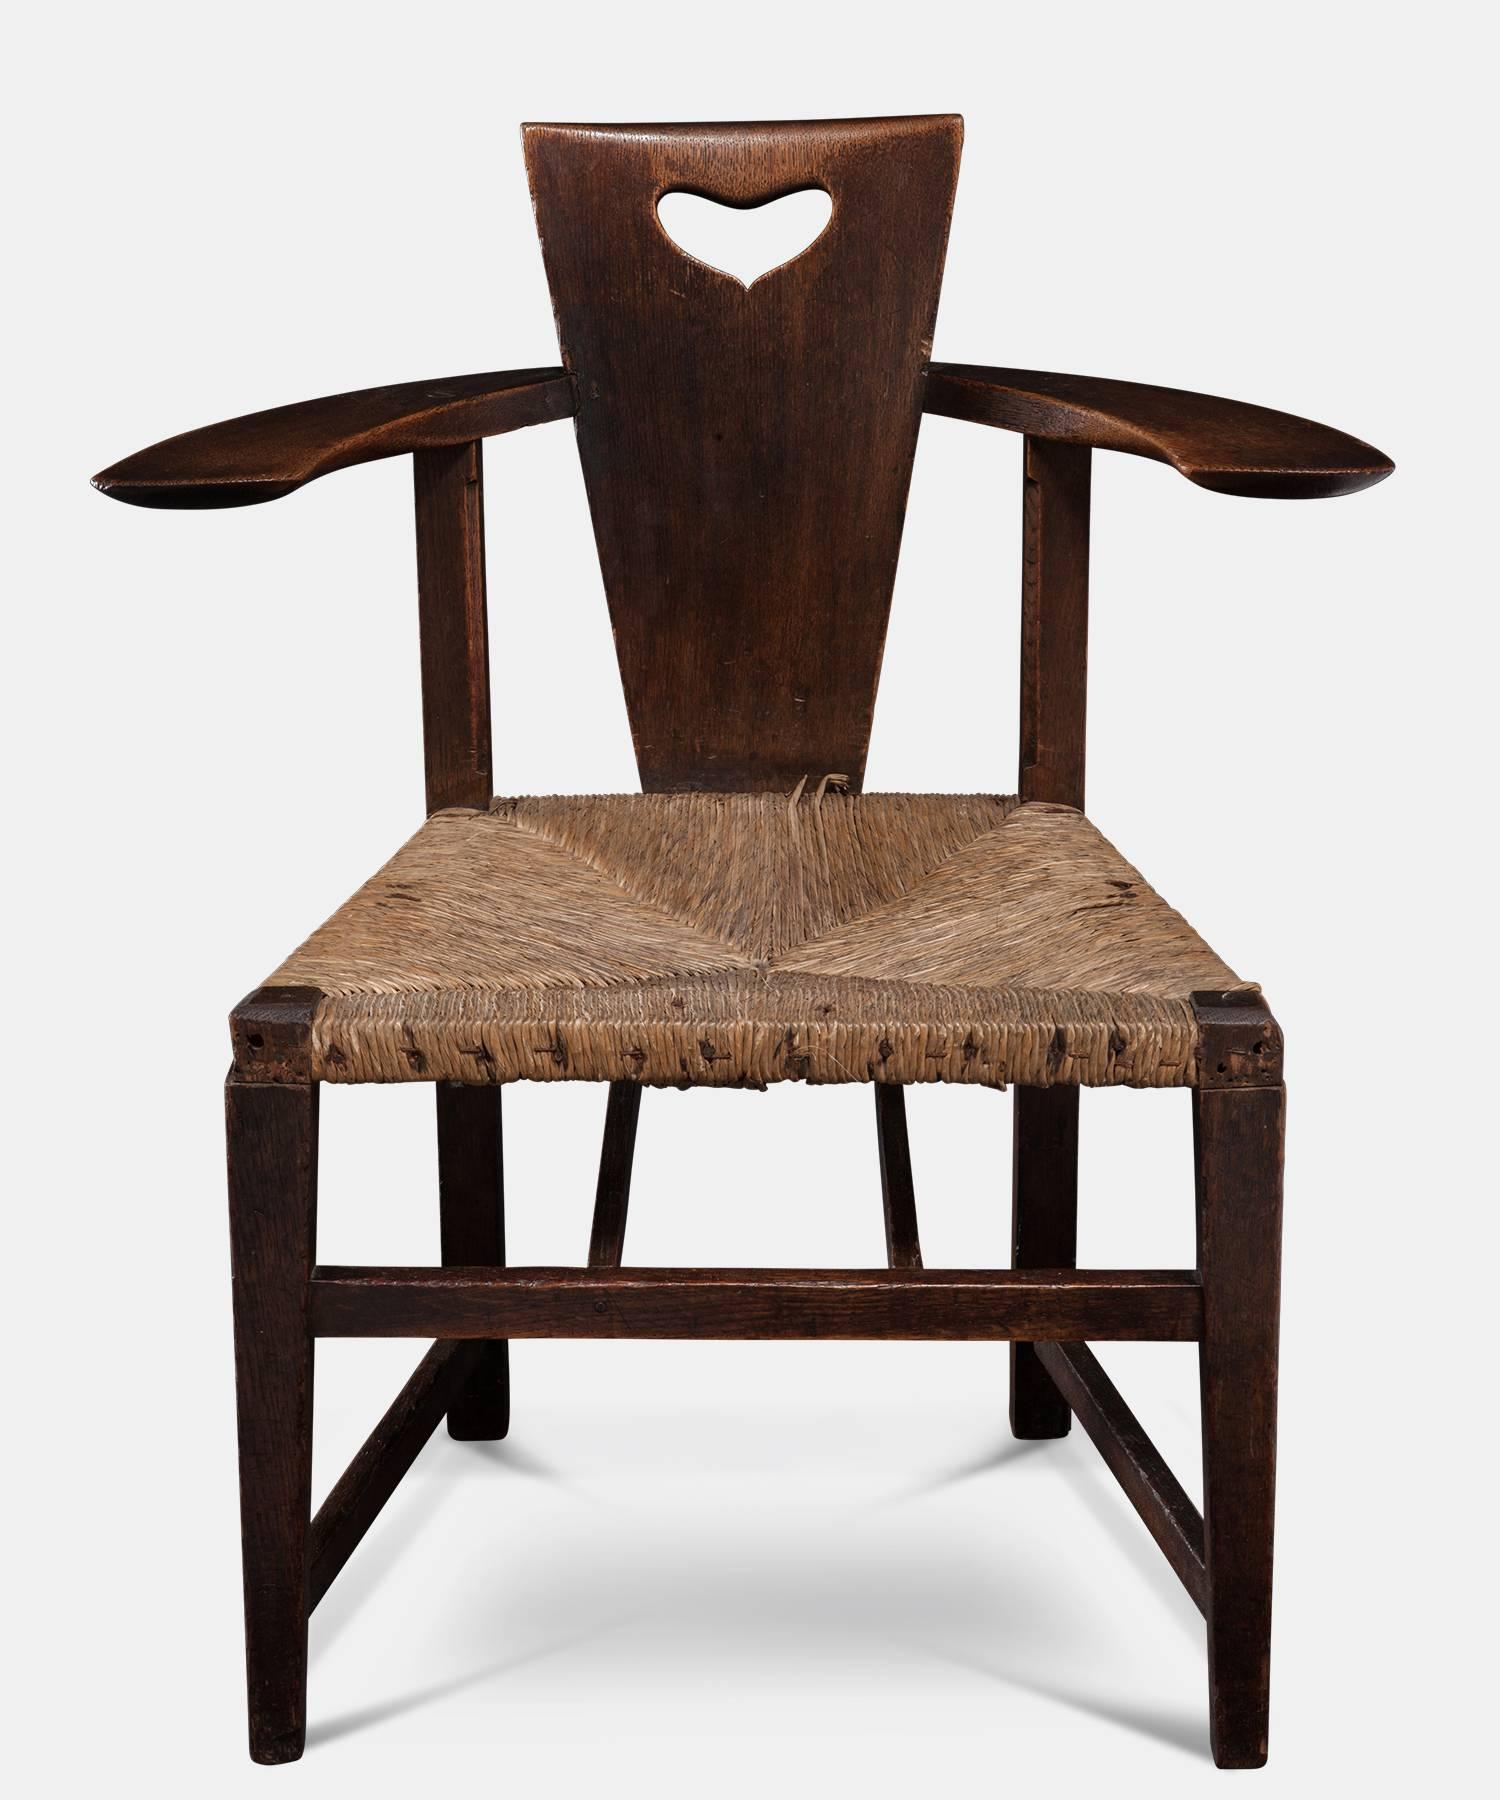 A rare George Walton oak Abingwood chair, made in 1897. 

The 'Abingwood' chair was used at both John Rowntree's café in Scarborough, and in the Billiards Room at Miss Cranston's Buchanan Street Tea Rooms, Glasgow.